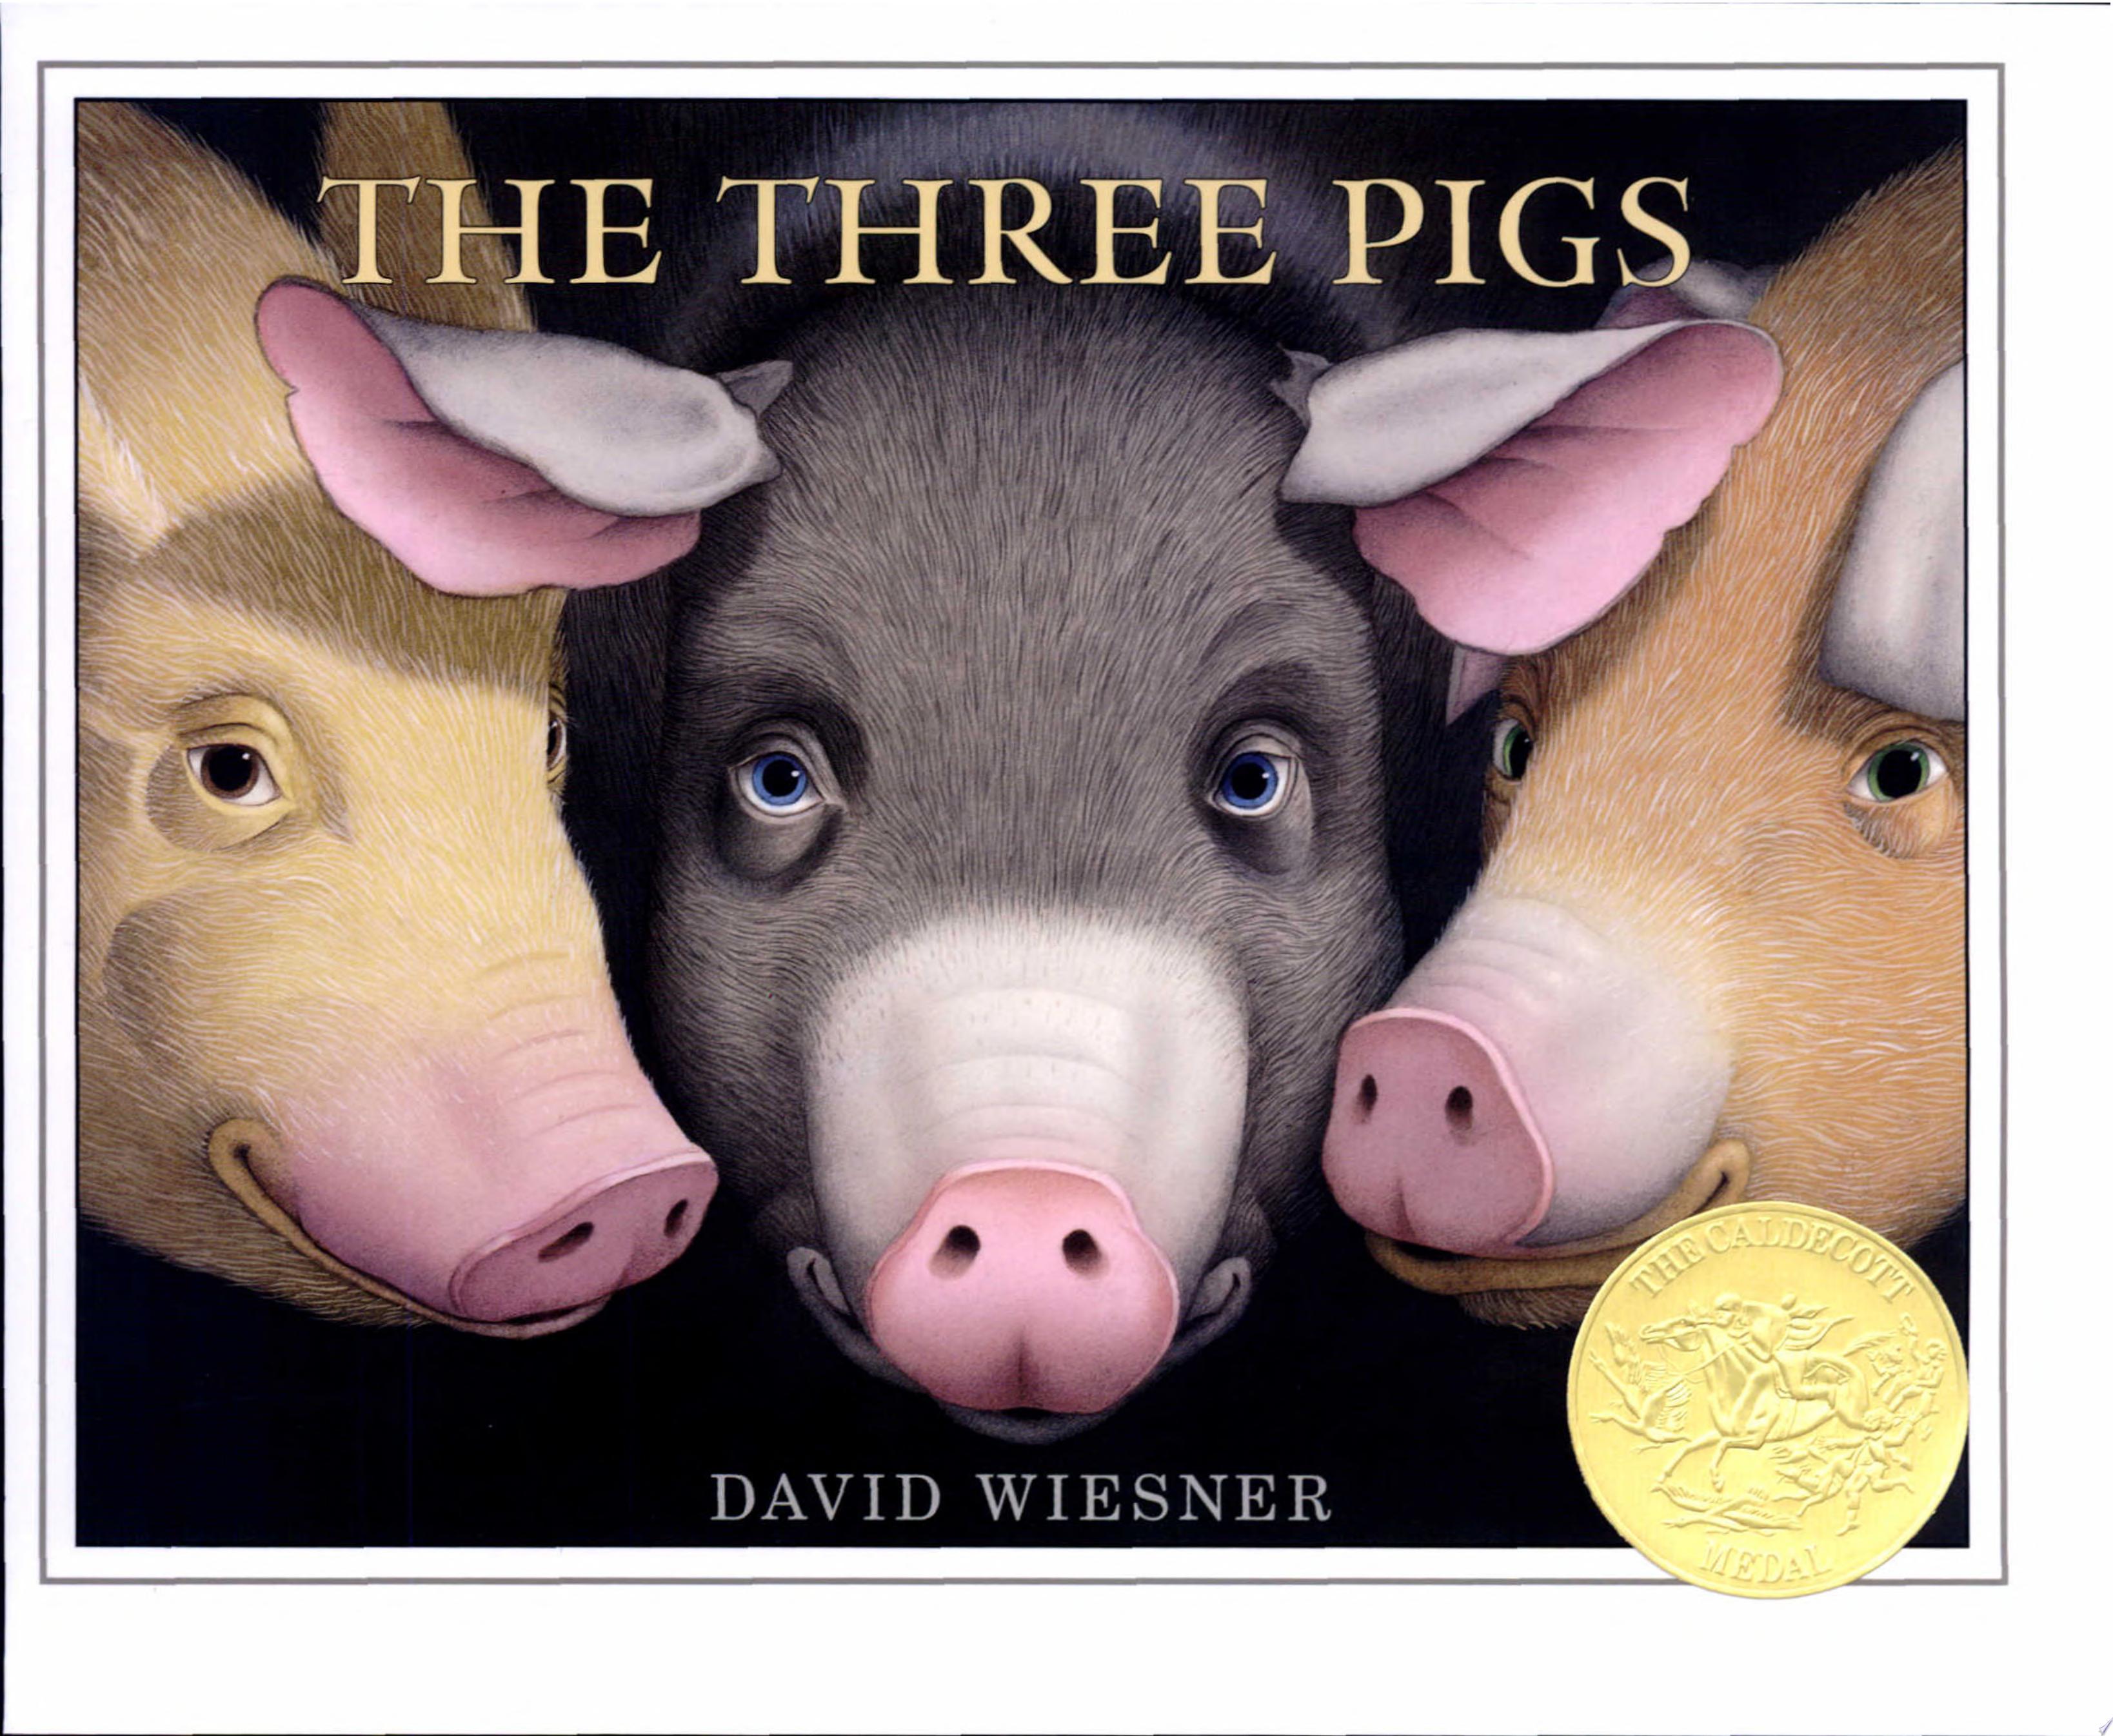 Image for "The Three Pigs"